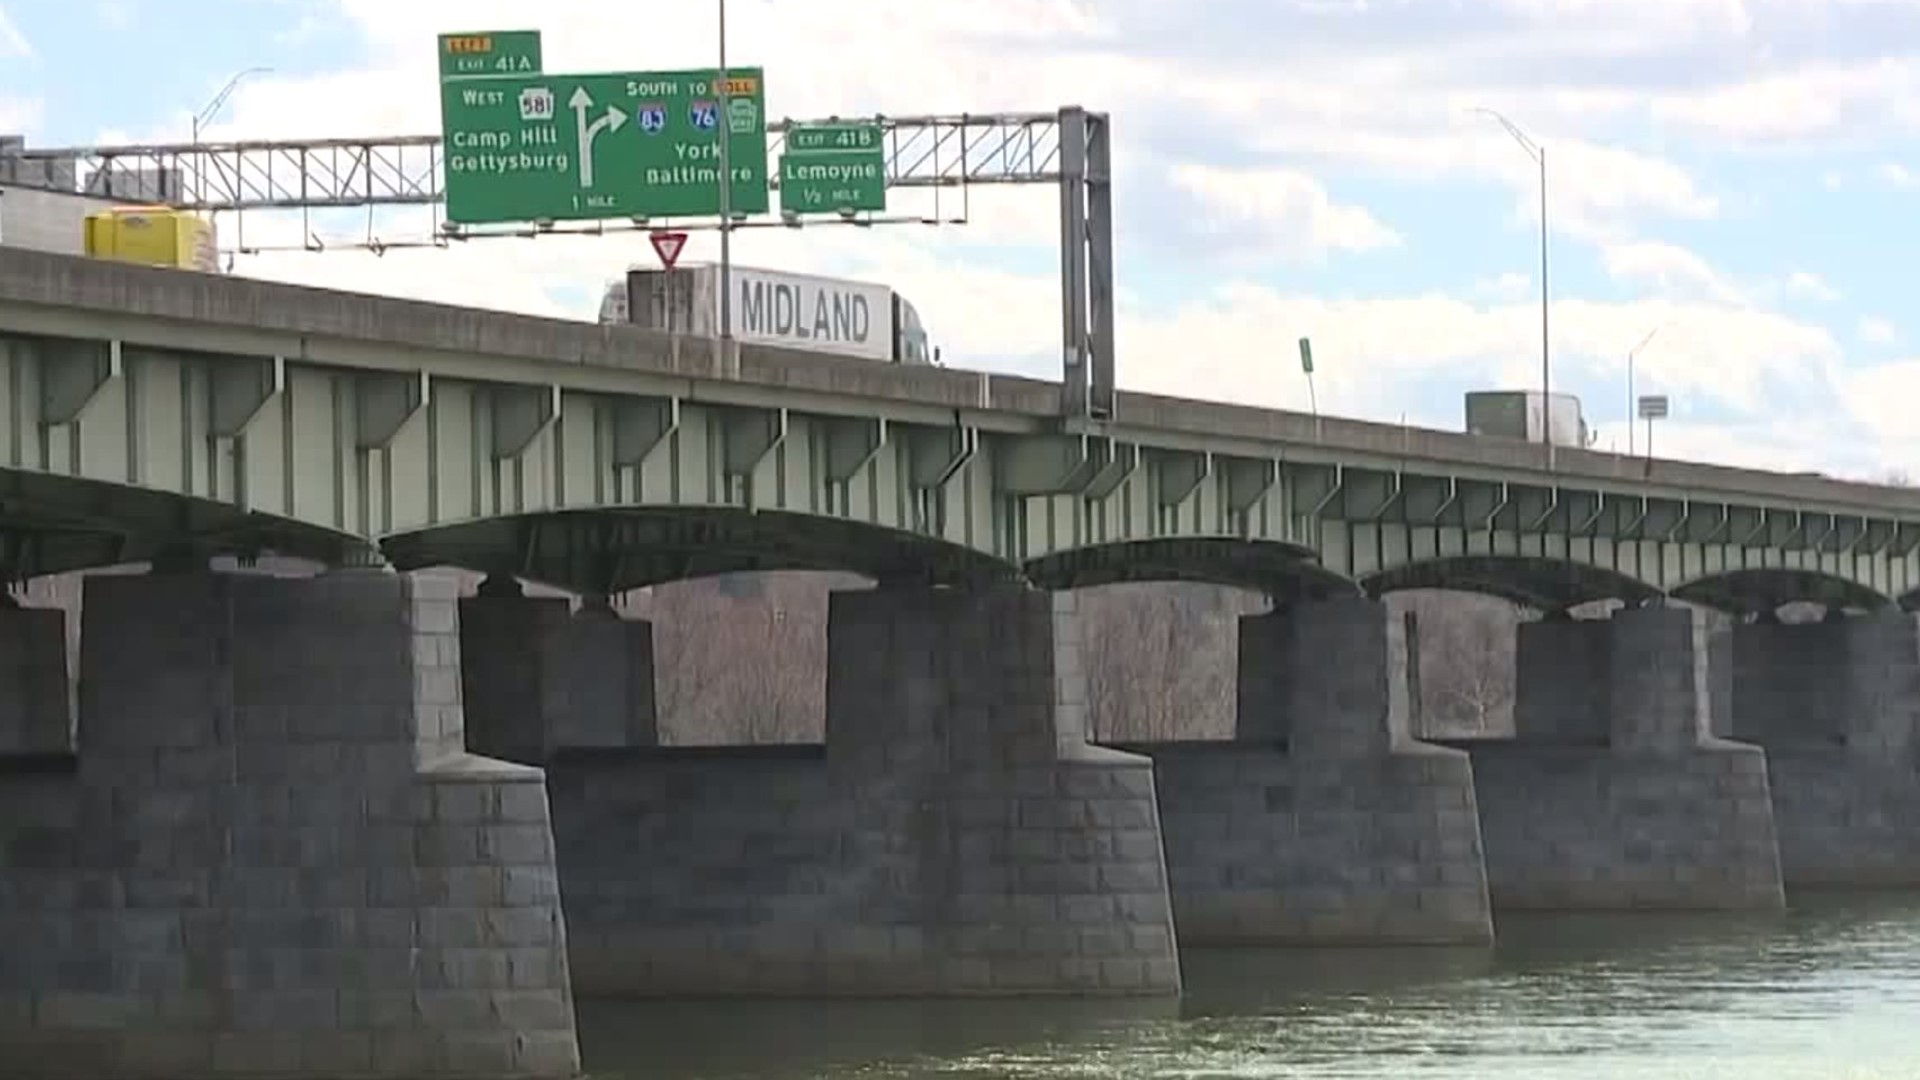 Nearly 14% of Pennsylvania bridges are in poor condition, ranking 5th in the country, according to the American Road and Transportation Builders Association.